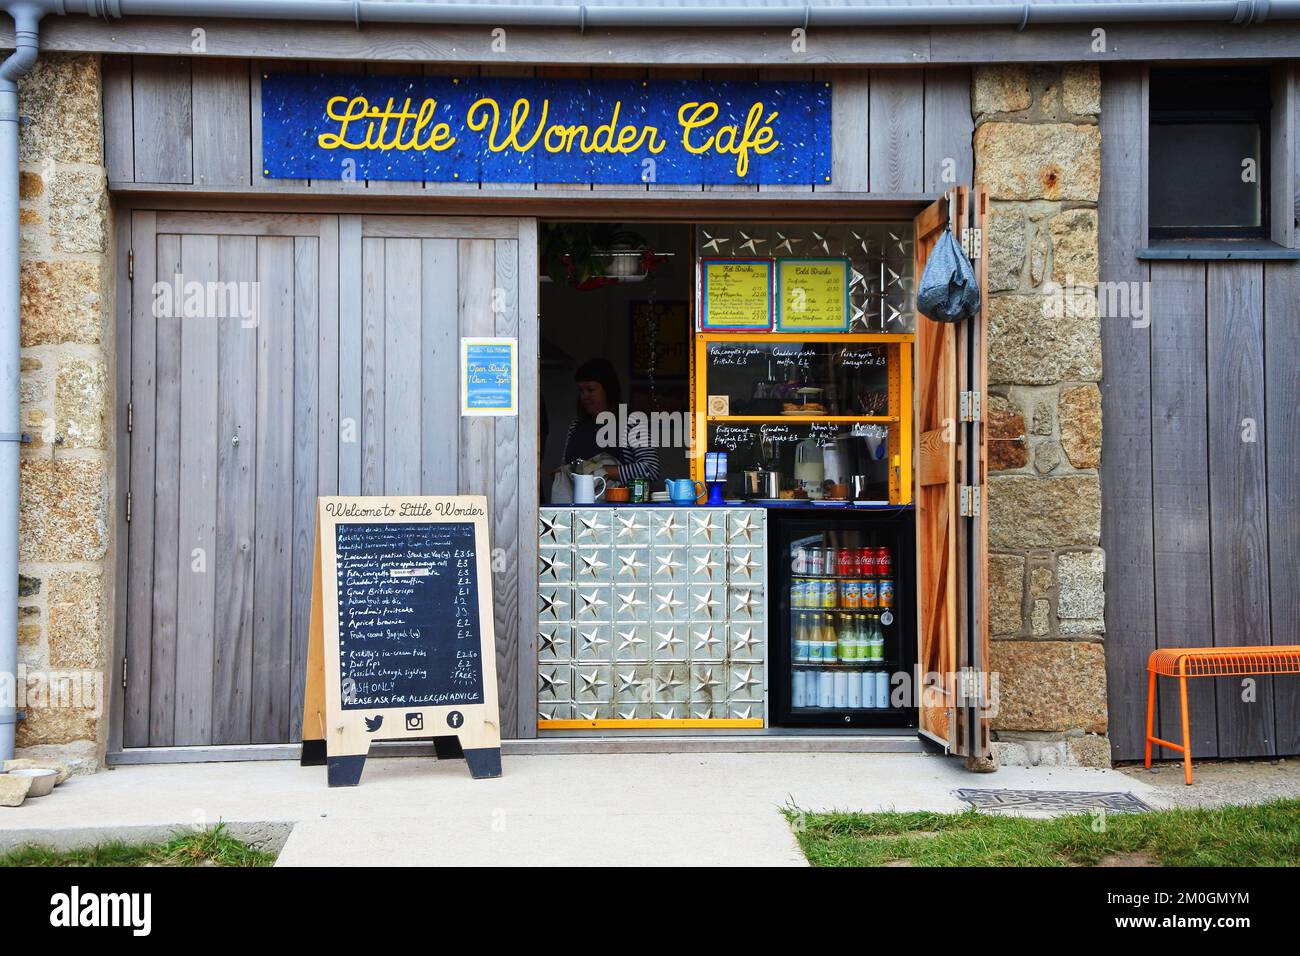 Small takeaway situated in the Cape Cornwall car park, Cornwall, UK - John Gollop Stock Photo